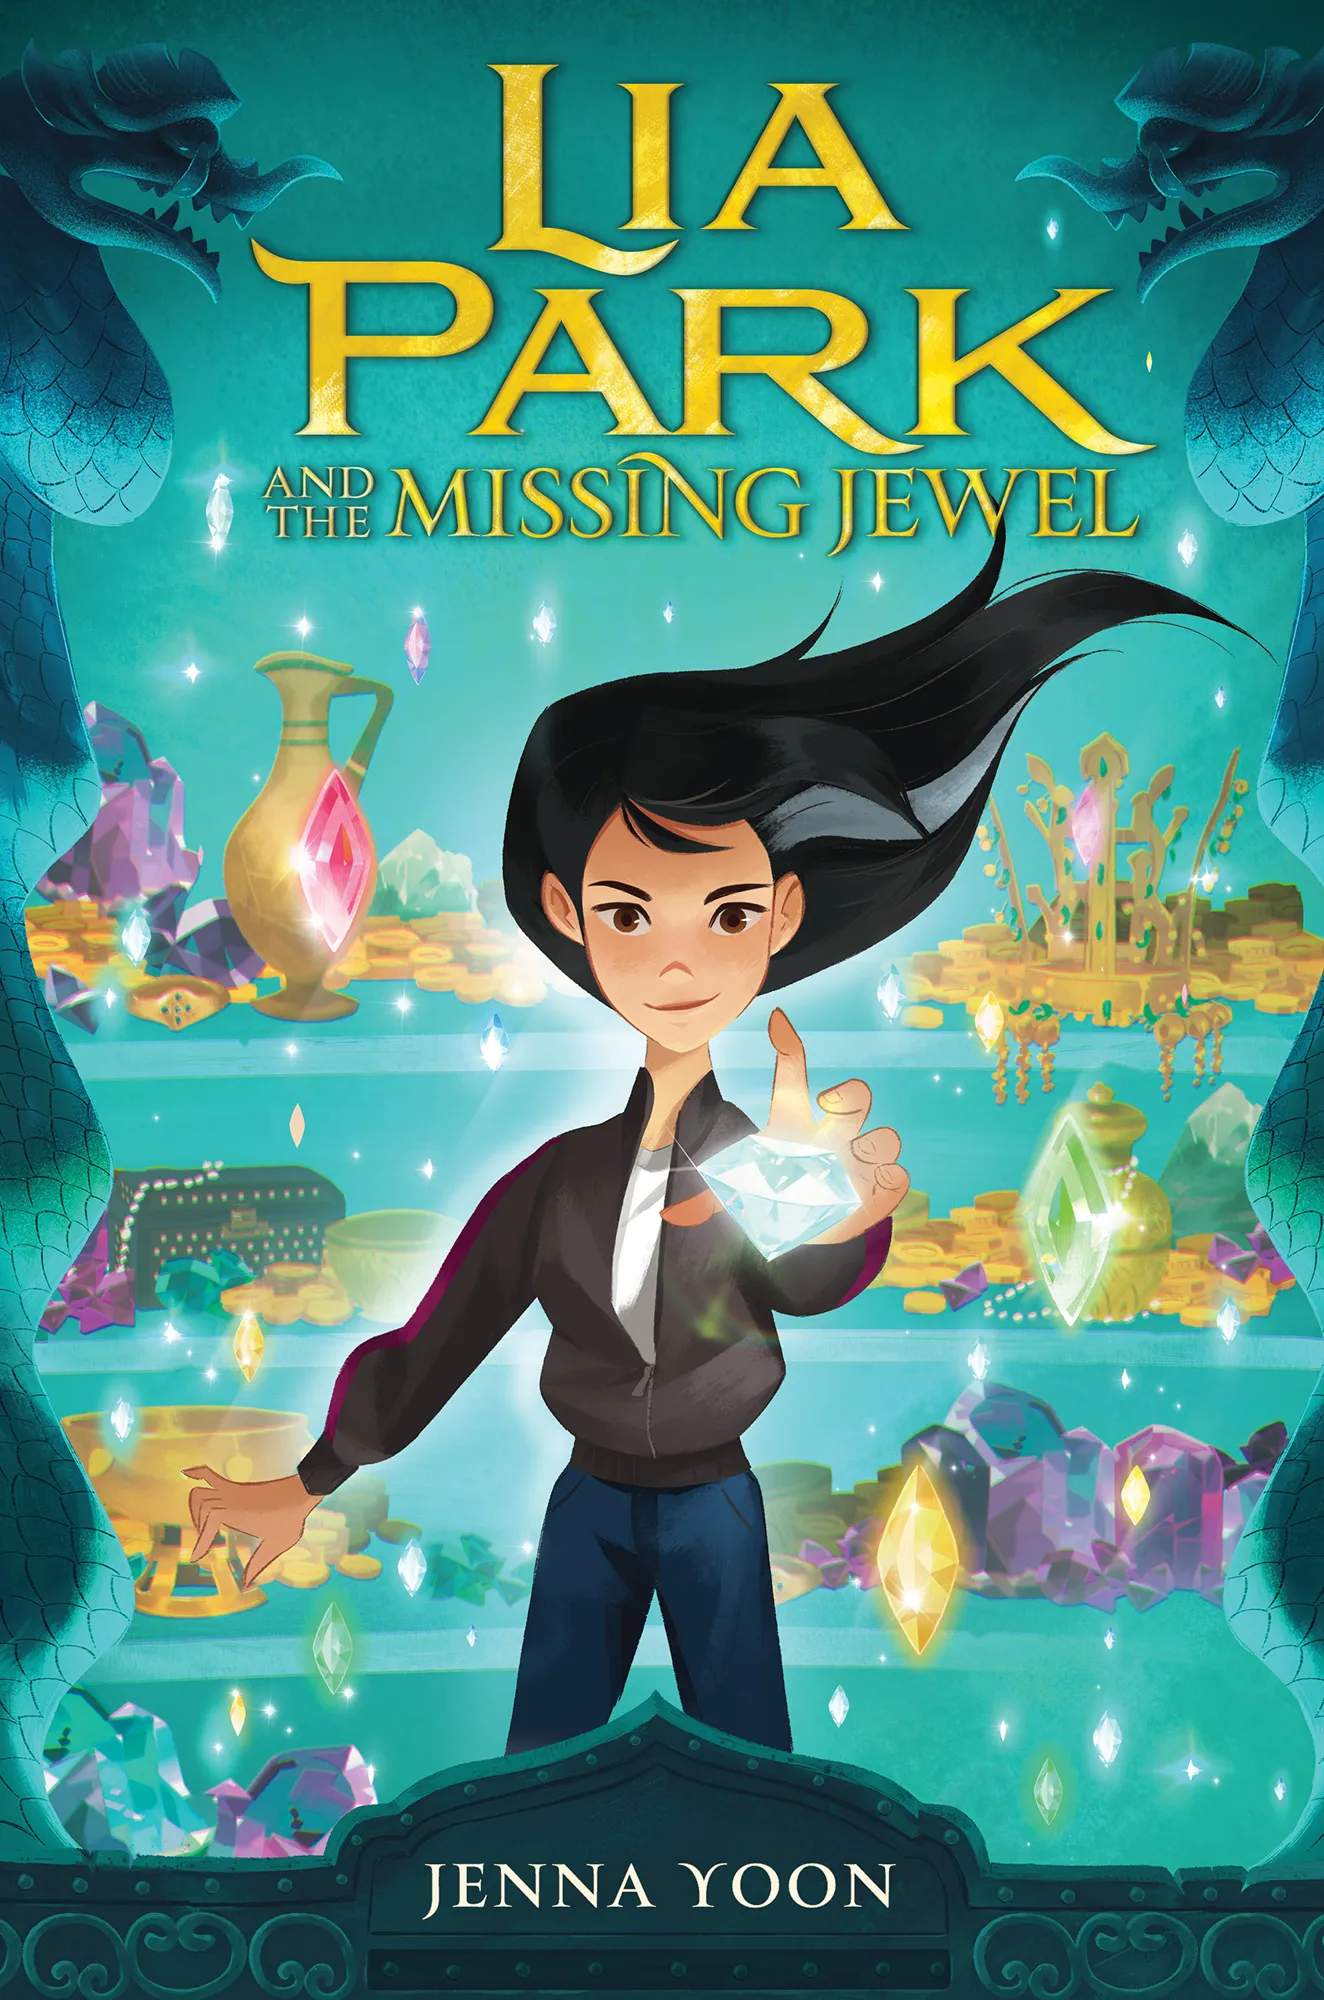 Lia Park and the Missing Jewel (Lia Park #1)